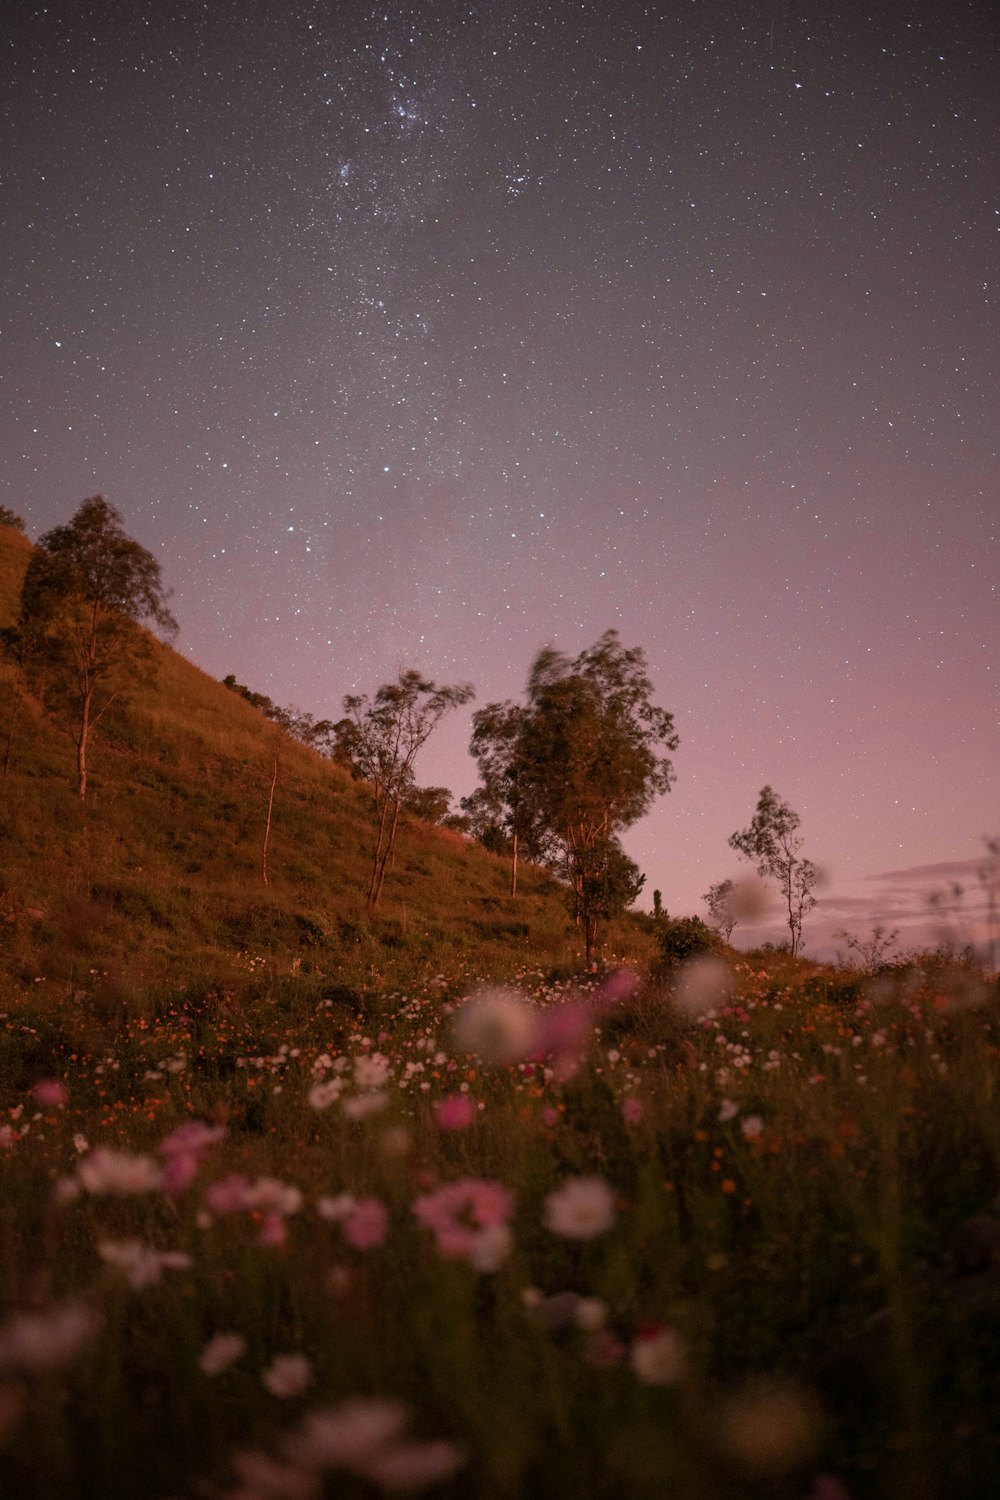 a field with flowers and trees under a night sky